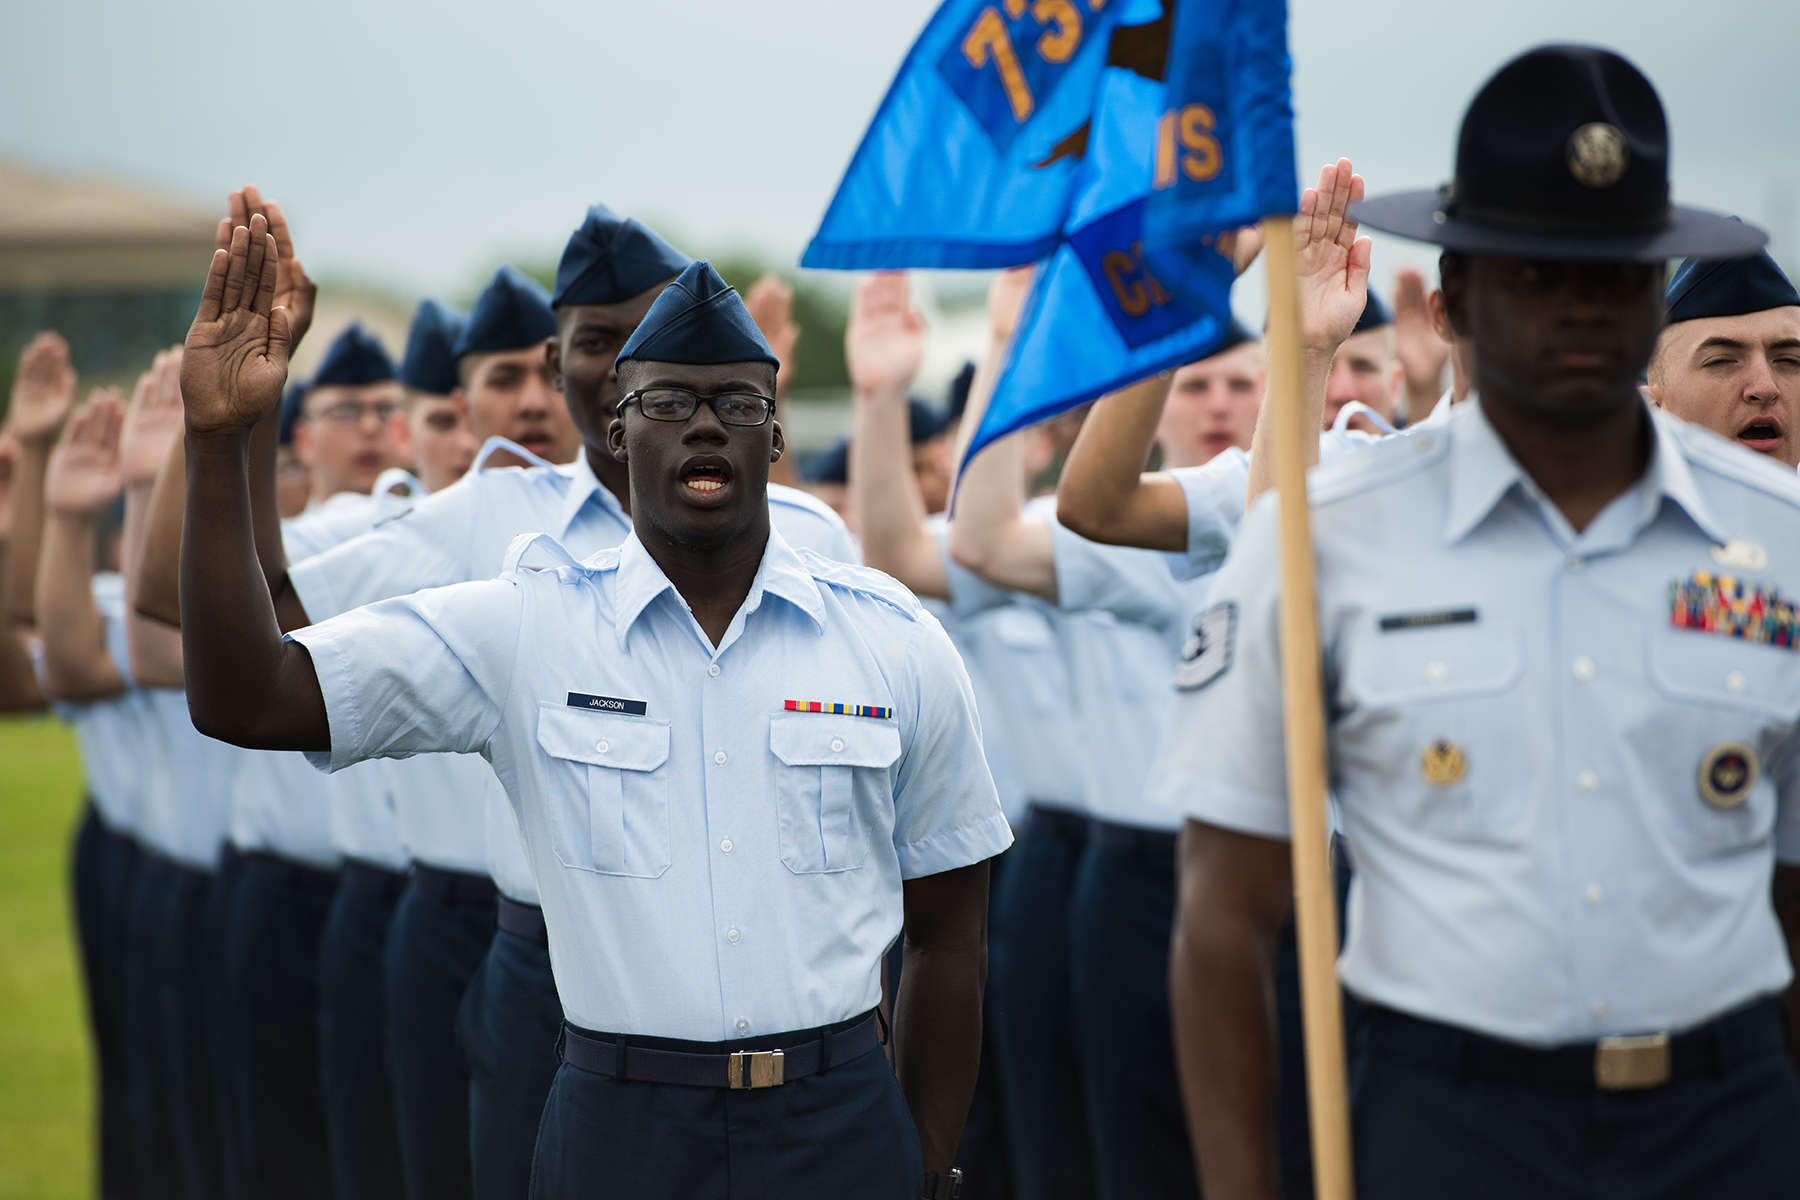 New in 2022: The Air Force will try to rightsize the number of airmen